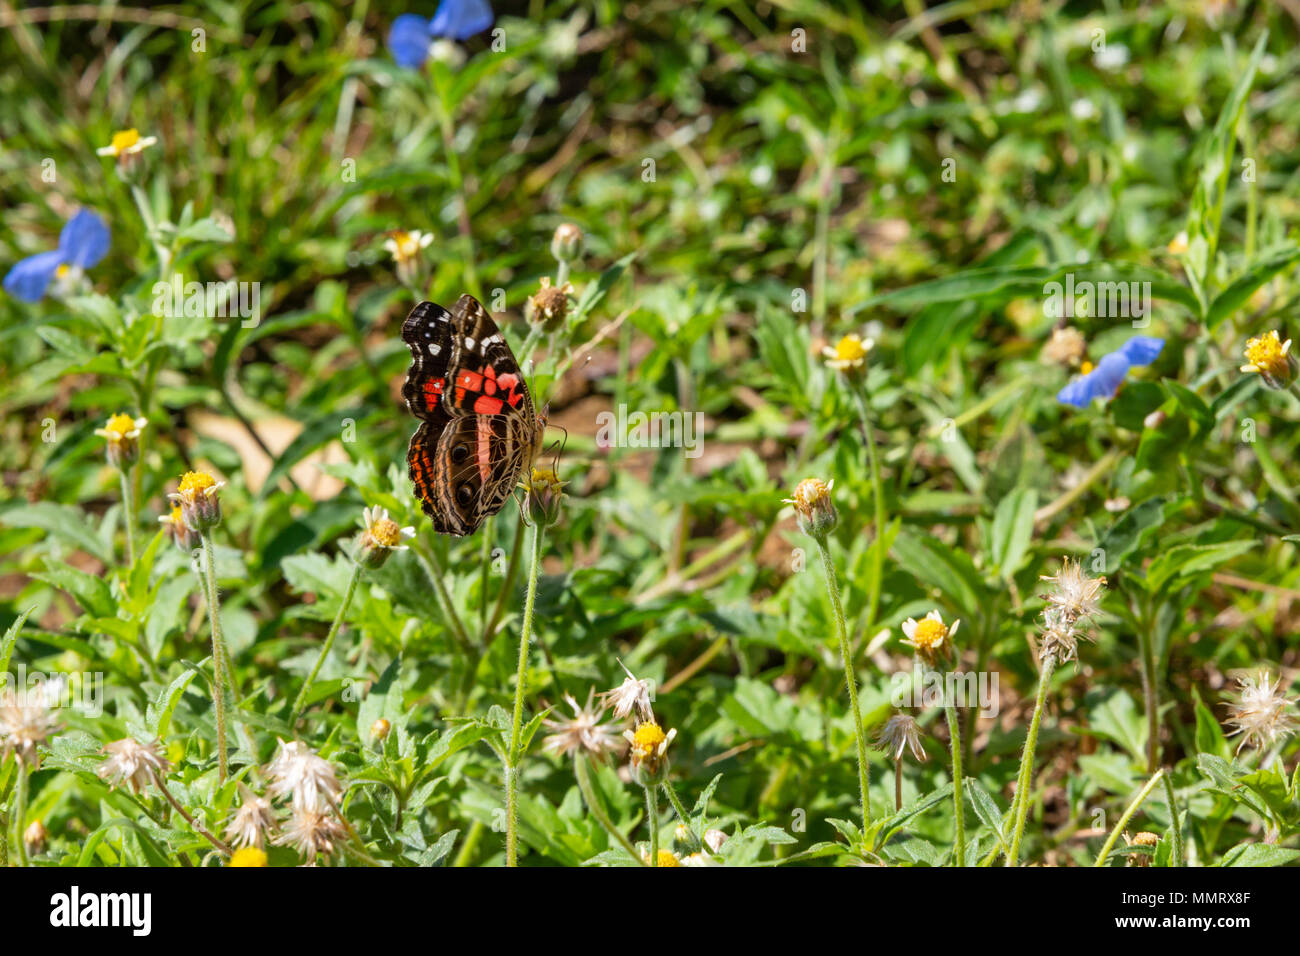 Asuncion, Paraguay. 12th May, 2018. A vivid painted lady or banded lady (Vanessa myrinna) butterfly feeds the nectar of tridax daisy or coatbuttons (Tridax procumbens) blooming flower during a sunny and pleasant afternoon with temperatures high around 25°C in Asuncion, Paraguay. Credit: Andre M. Chang/ARDUOPRESS/Alamy Live News Stock Photo